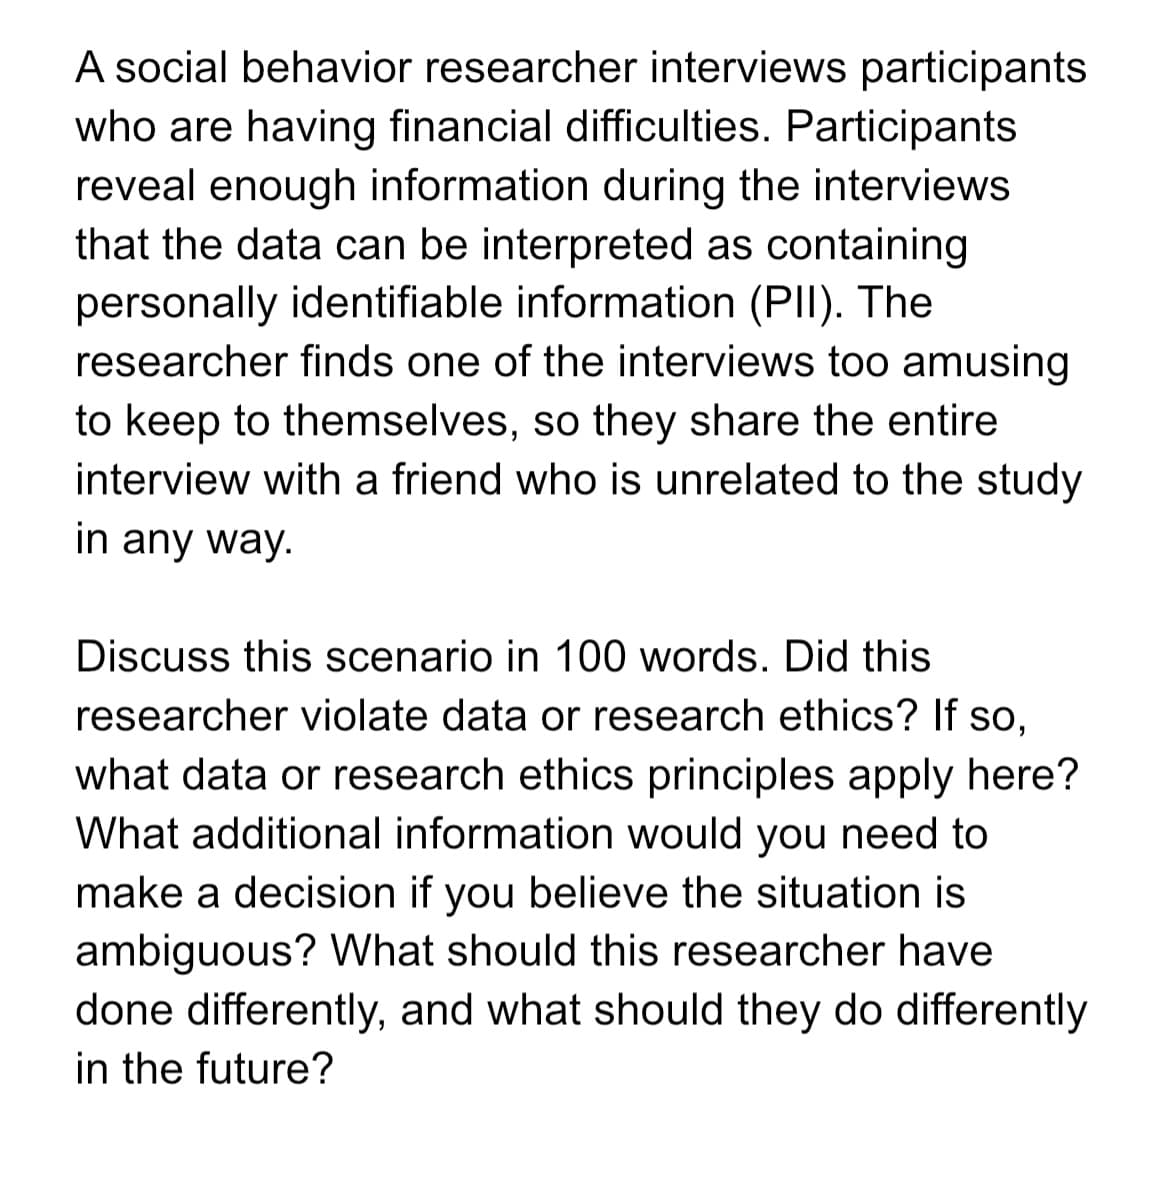 A social behavior researcher interviews participants
who are having financial difficulties. Participants
reveal enough information during the interviews
that the data can be interpreted as containing
personally identifiable information (PII). The
researcher finds one of the interviews too amusing
to keep to themselves, so they share the entire
interview with a friend who is unrelated to the study
in any way.
Discuss this scenario in 100 words. Did this
researcher violate data or research ethics? If so,
what data or research ethics principles apply here?
What additional information would you need to
make a decision if you believe the situation is
ambiguous? What should this researcher have
done differently, and what should they do differently
in the future?